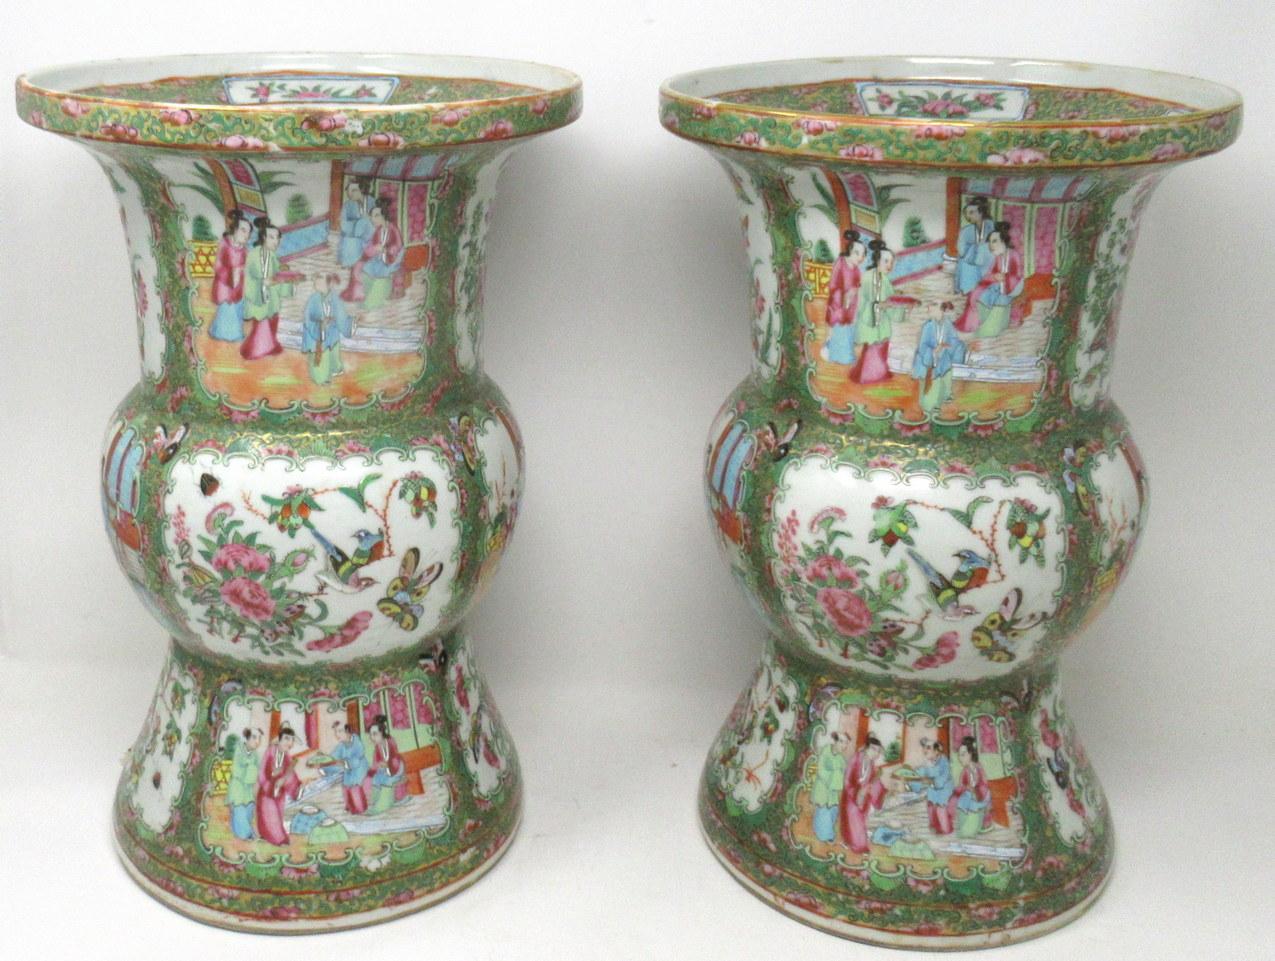 An exceptionally fine pair of Chinese Cantonese hand decorated porcelain vases of rare outline gu form, of quite good size proportions, (see last image in situ) mid-nineteenth century, possibly earlier.

The main outer bodies of bulbous form above